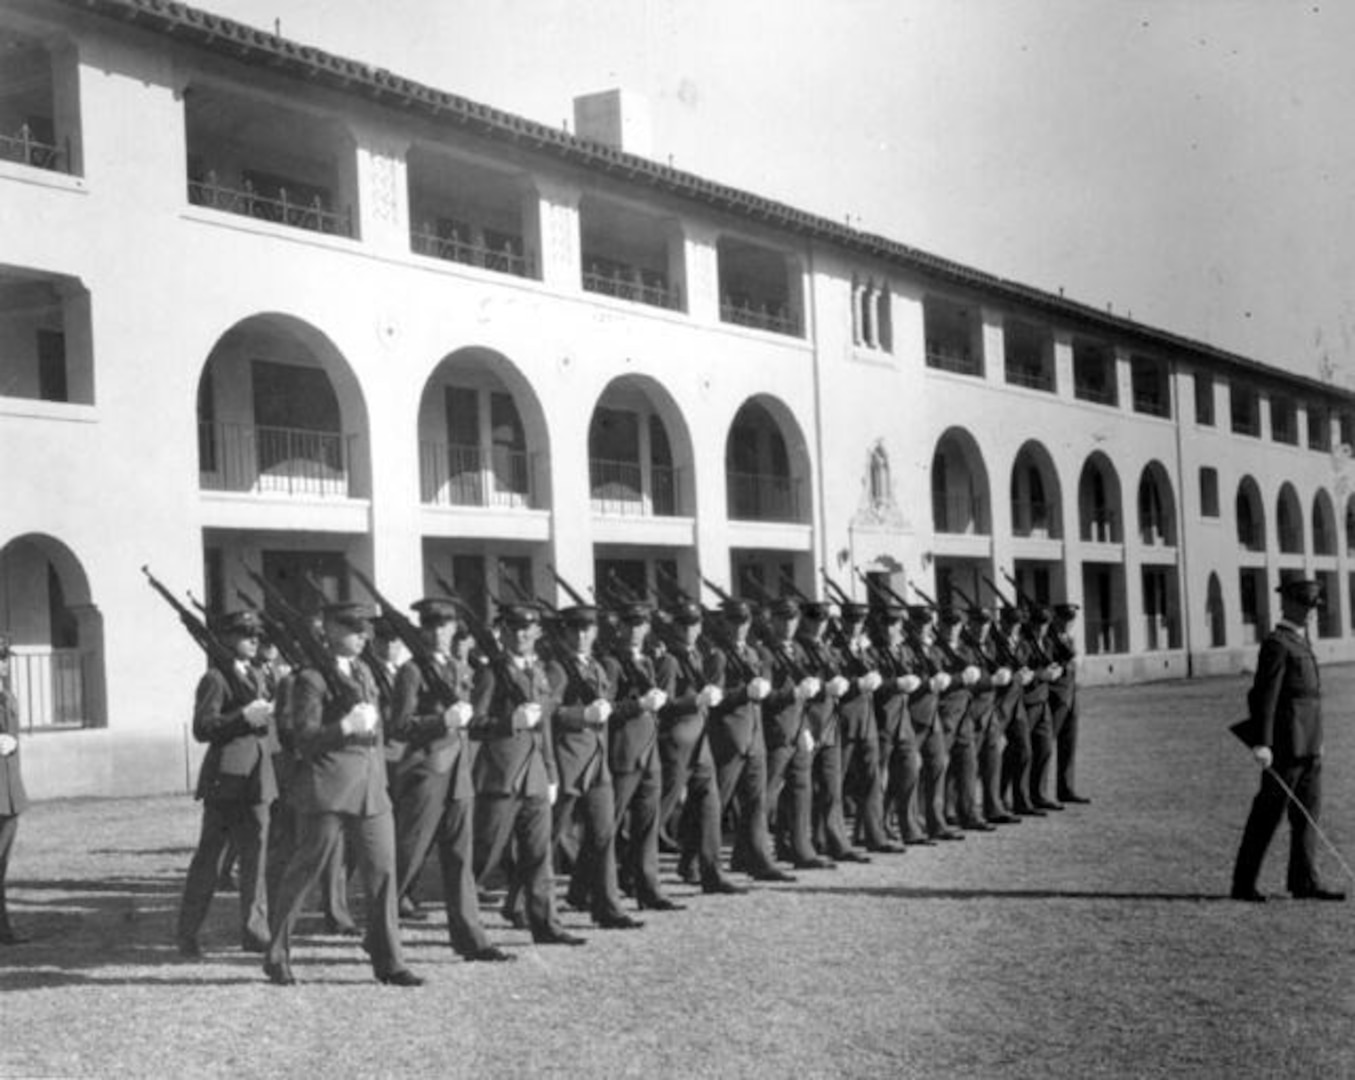 Formation in front of dormitory.